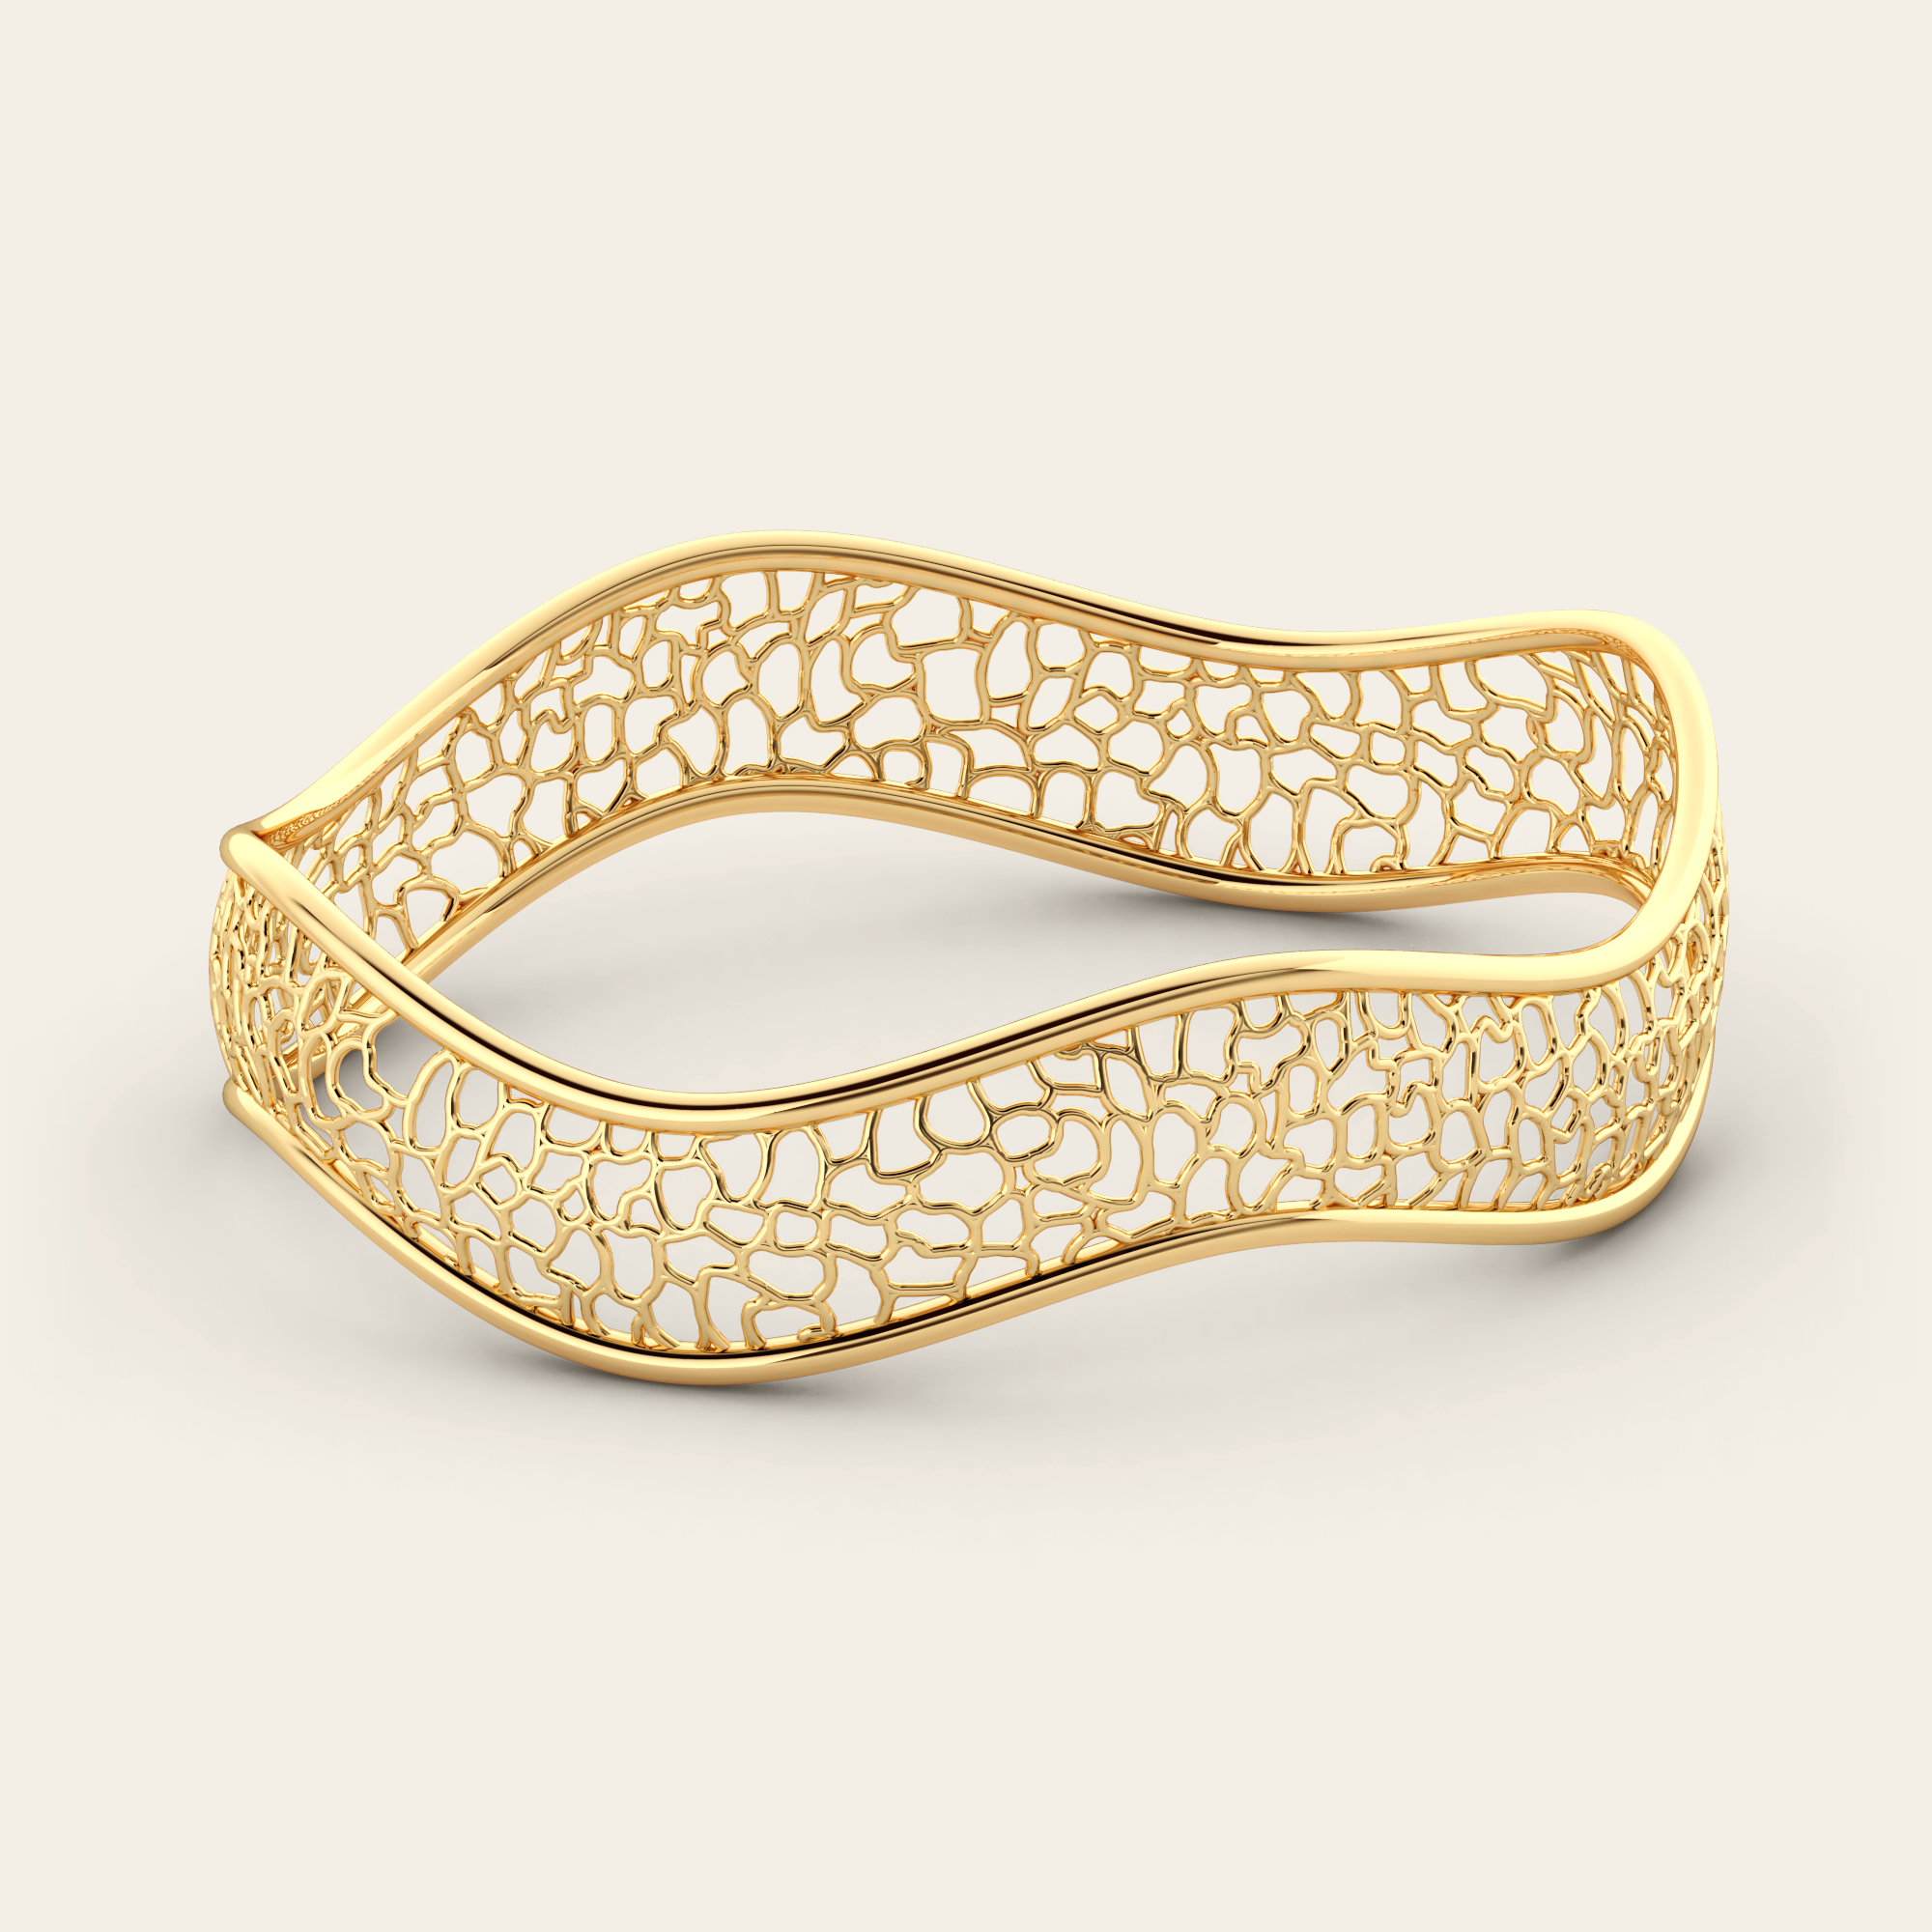 Contour Cracked Earth Stacking Bangle in 18k Yellow Gold